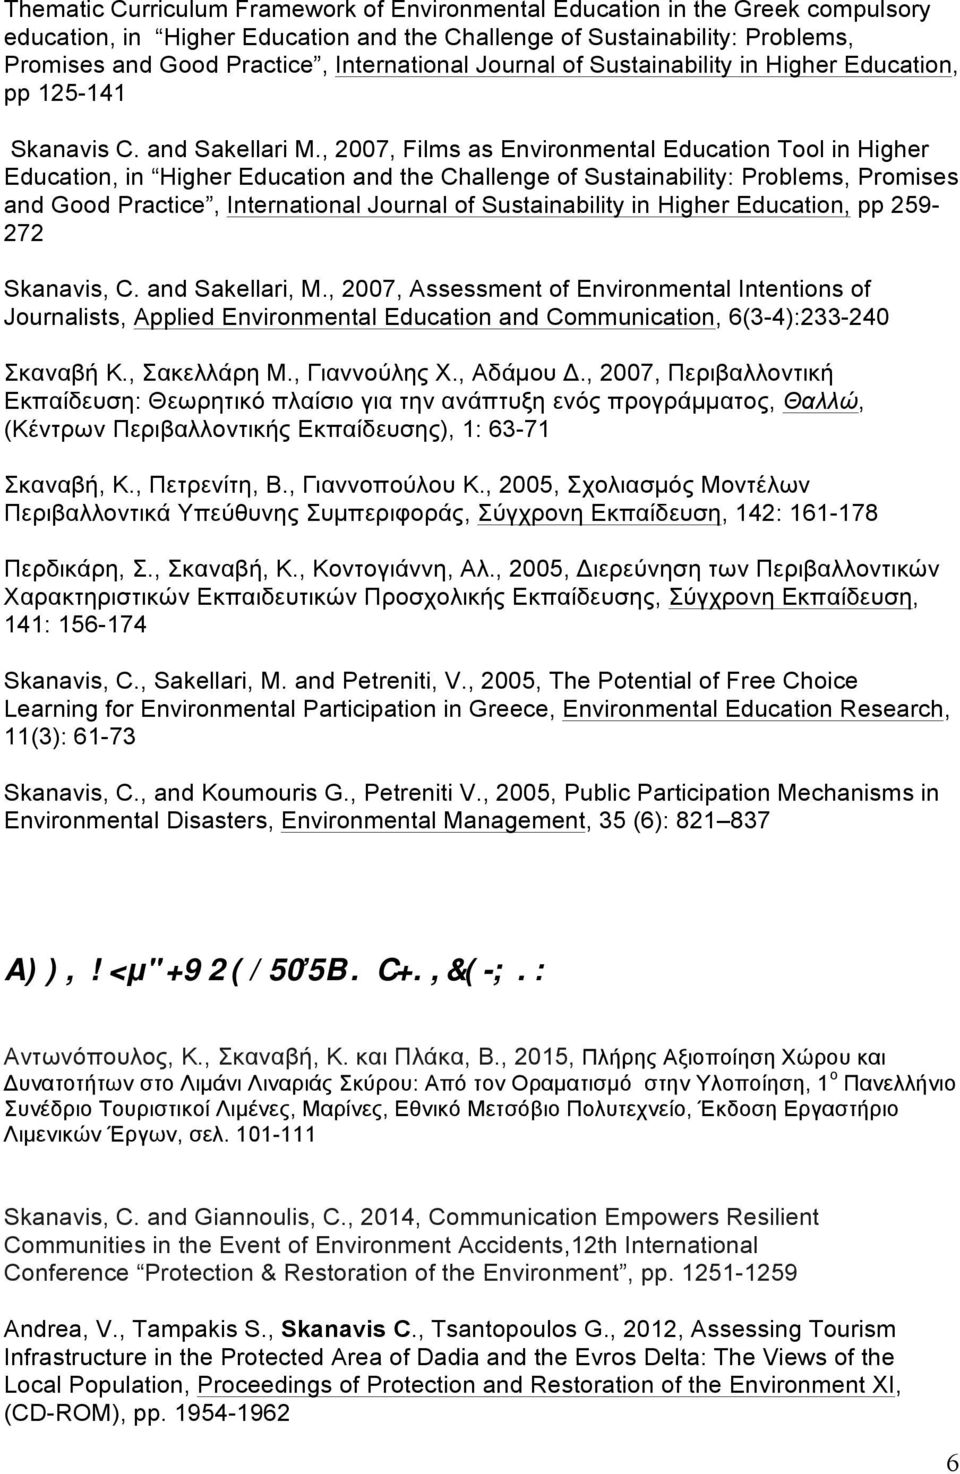 , 2007, Films as Environmental Education Tool in Higher Education, in Higher Education and the Challenge of Sustainability: Problems, Promises and Good Practice, International Journal of